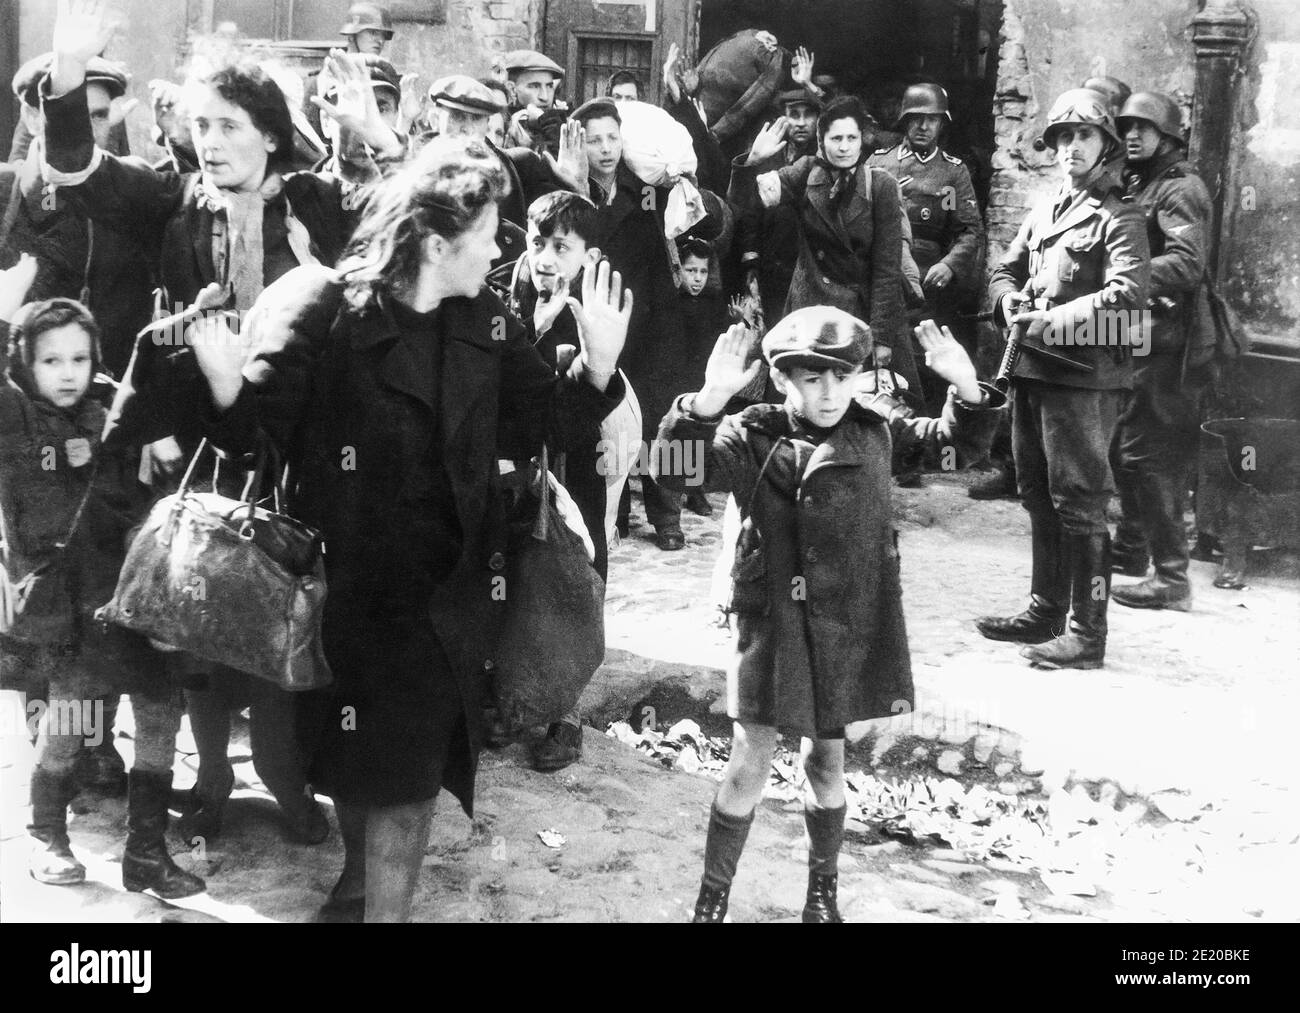 A boy raises his hands over his head as Nazi soldiers forcibly remove Polish Jews in the Warsaw Ghetto Uprising to be transported by train to Majdanek extermination camp or Treblinka. One of the most iconic photographs of WWII, the image, most likely from April or May 1943, was included in the Stoop Report given to Heinrich Himmler by SS and Police Leader Jürgen Stroop. Stock Photo